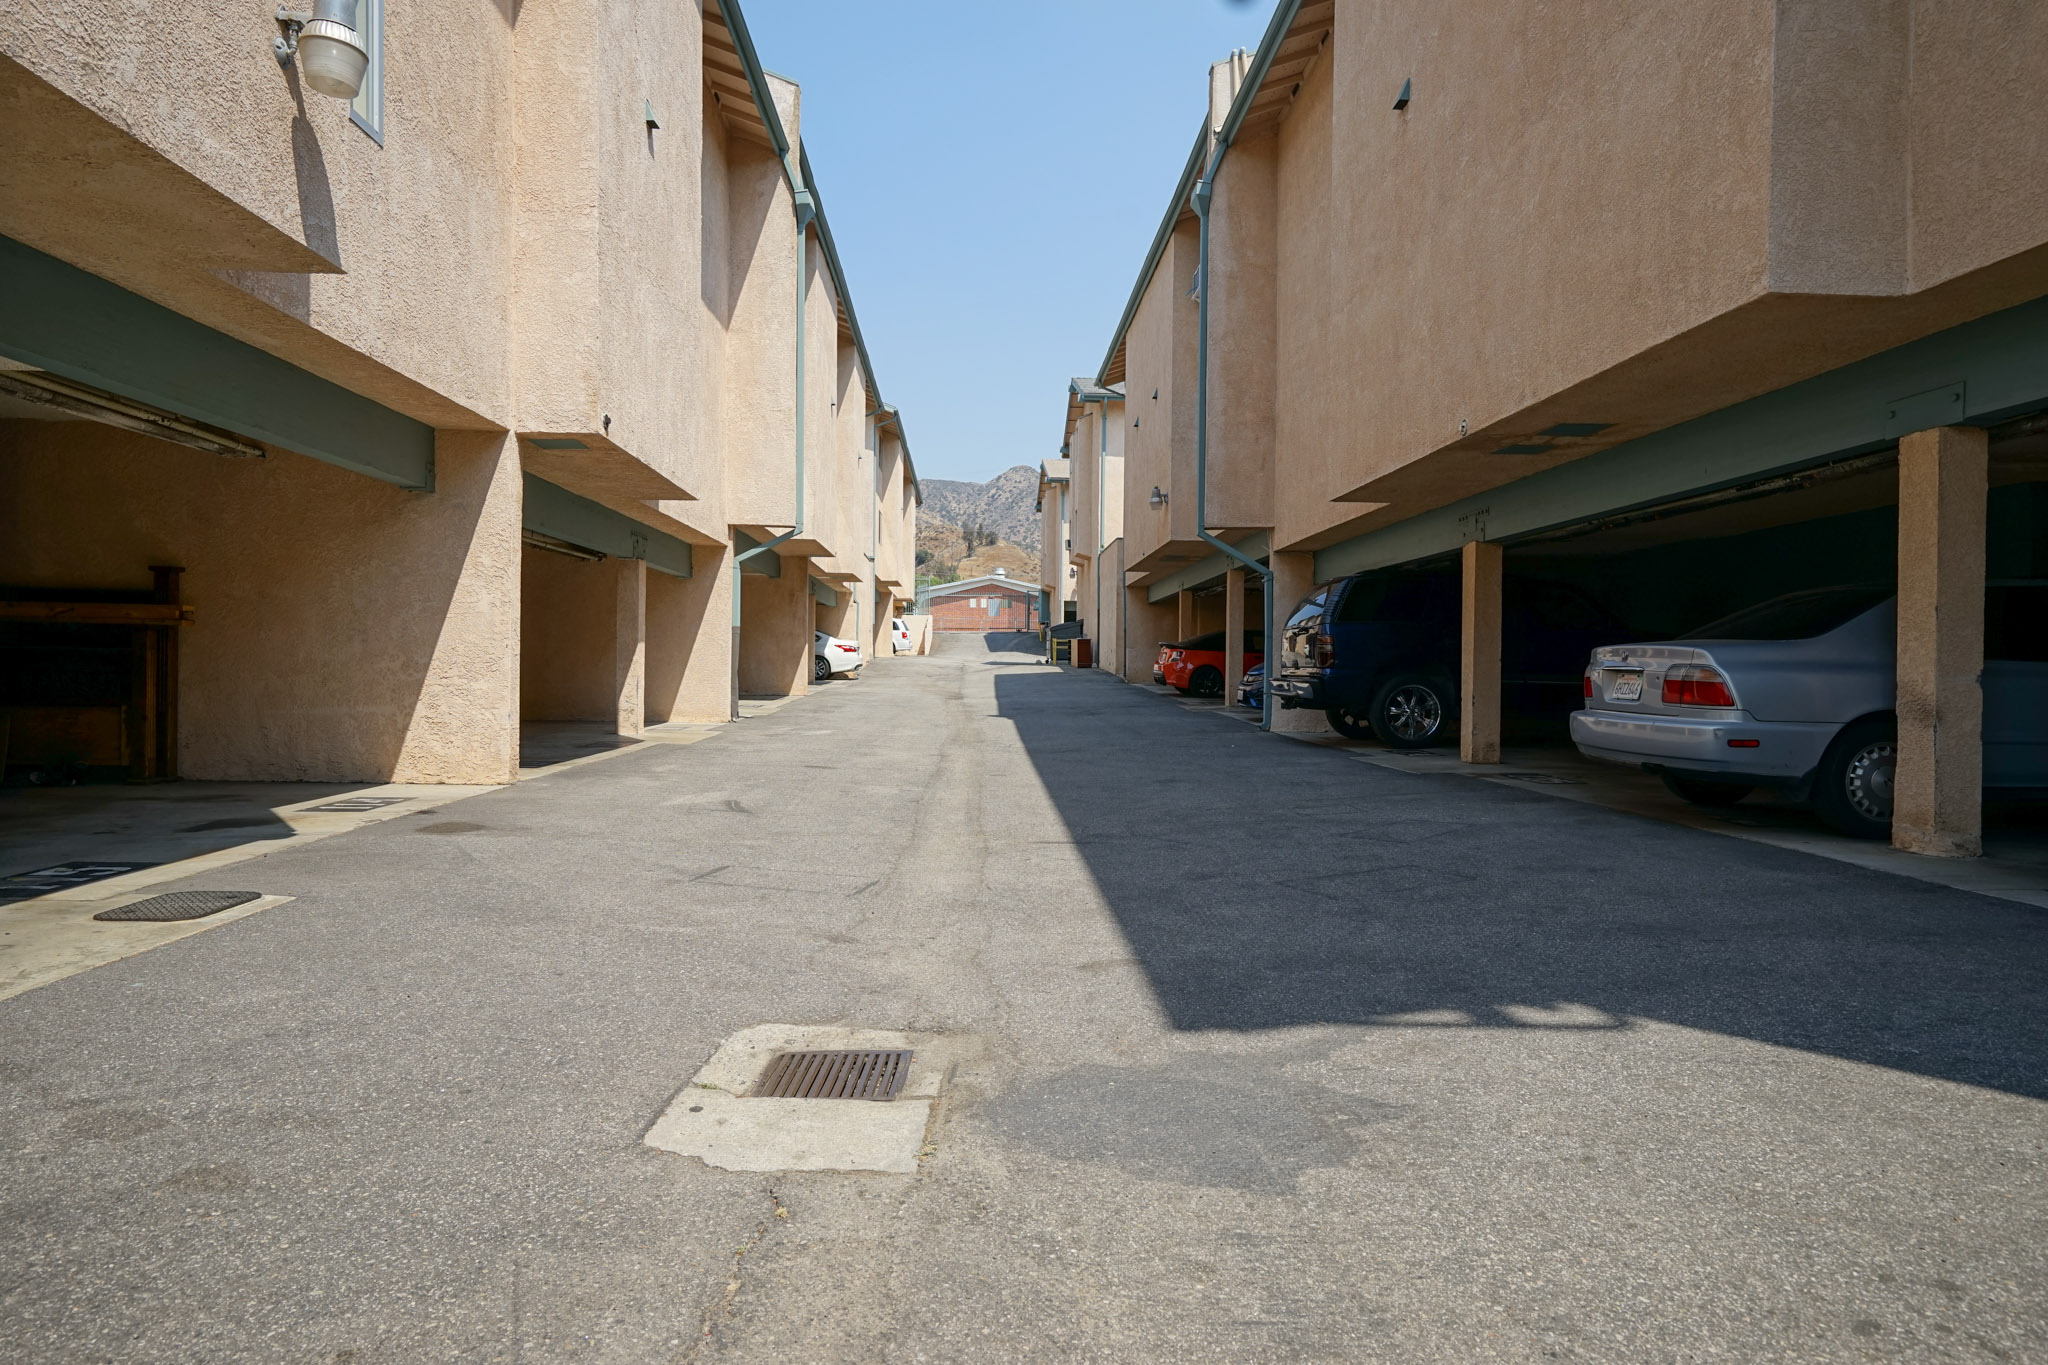 View of a driveway in the center opening of a building. Parking spaces are under the building.